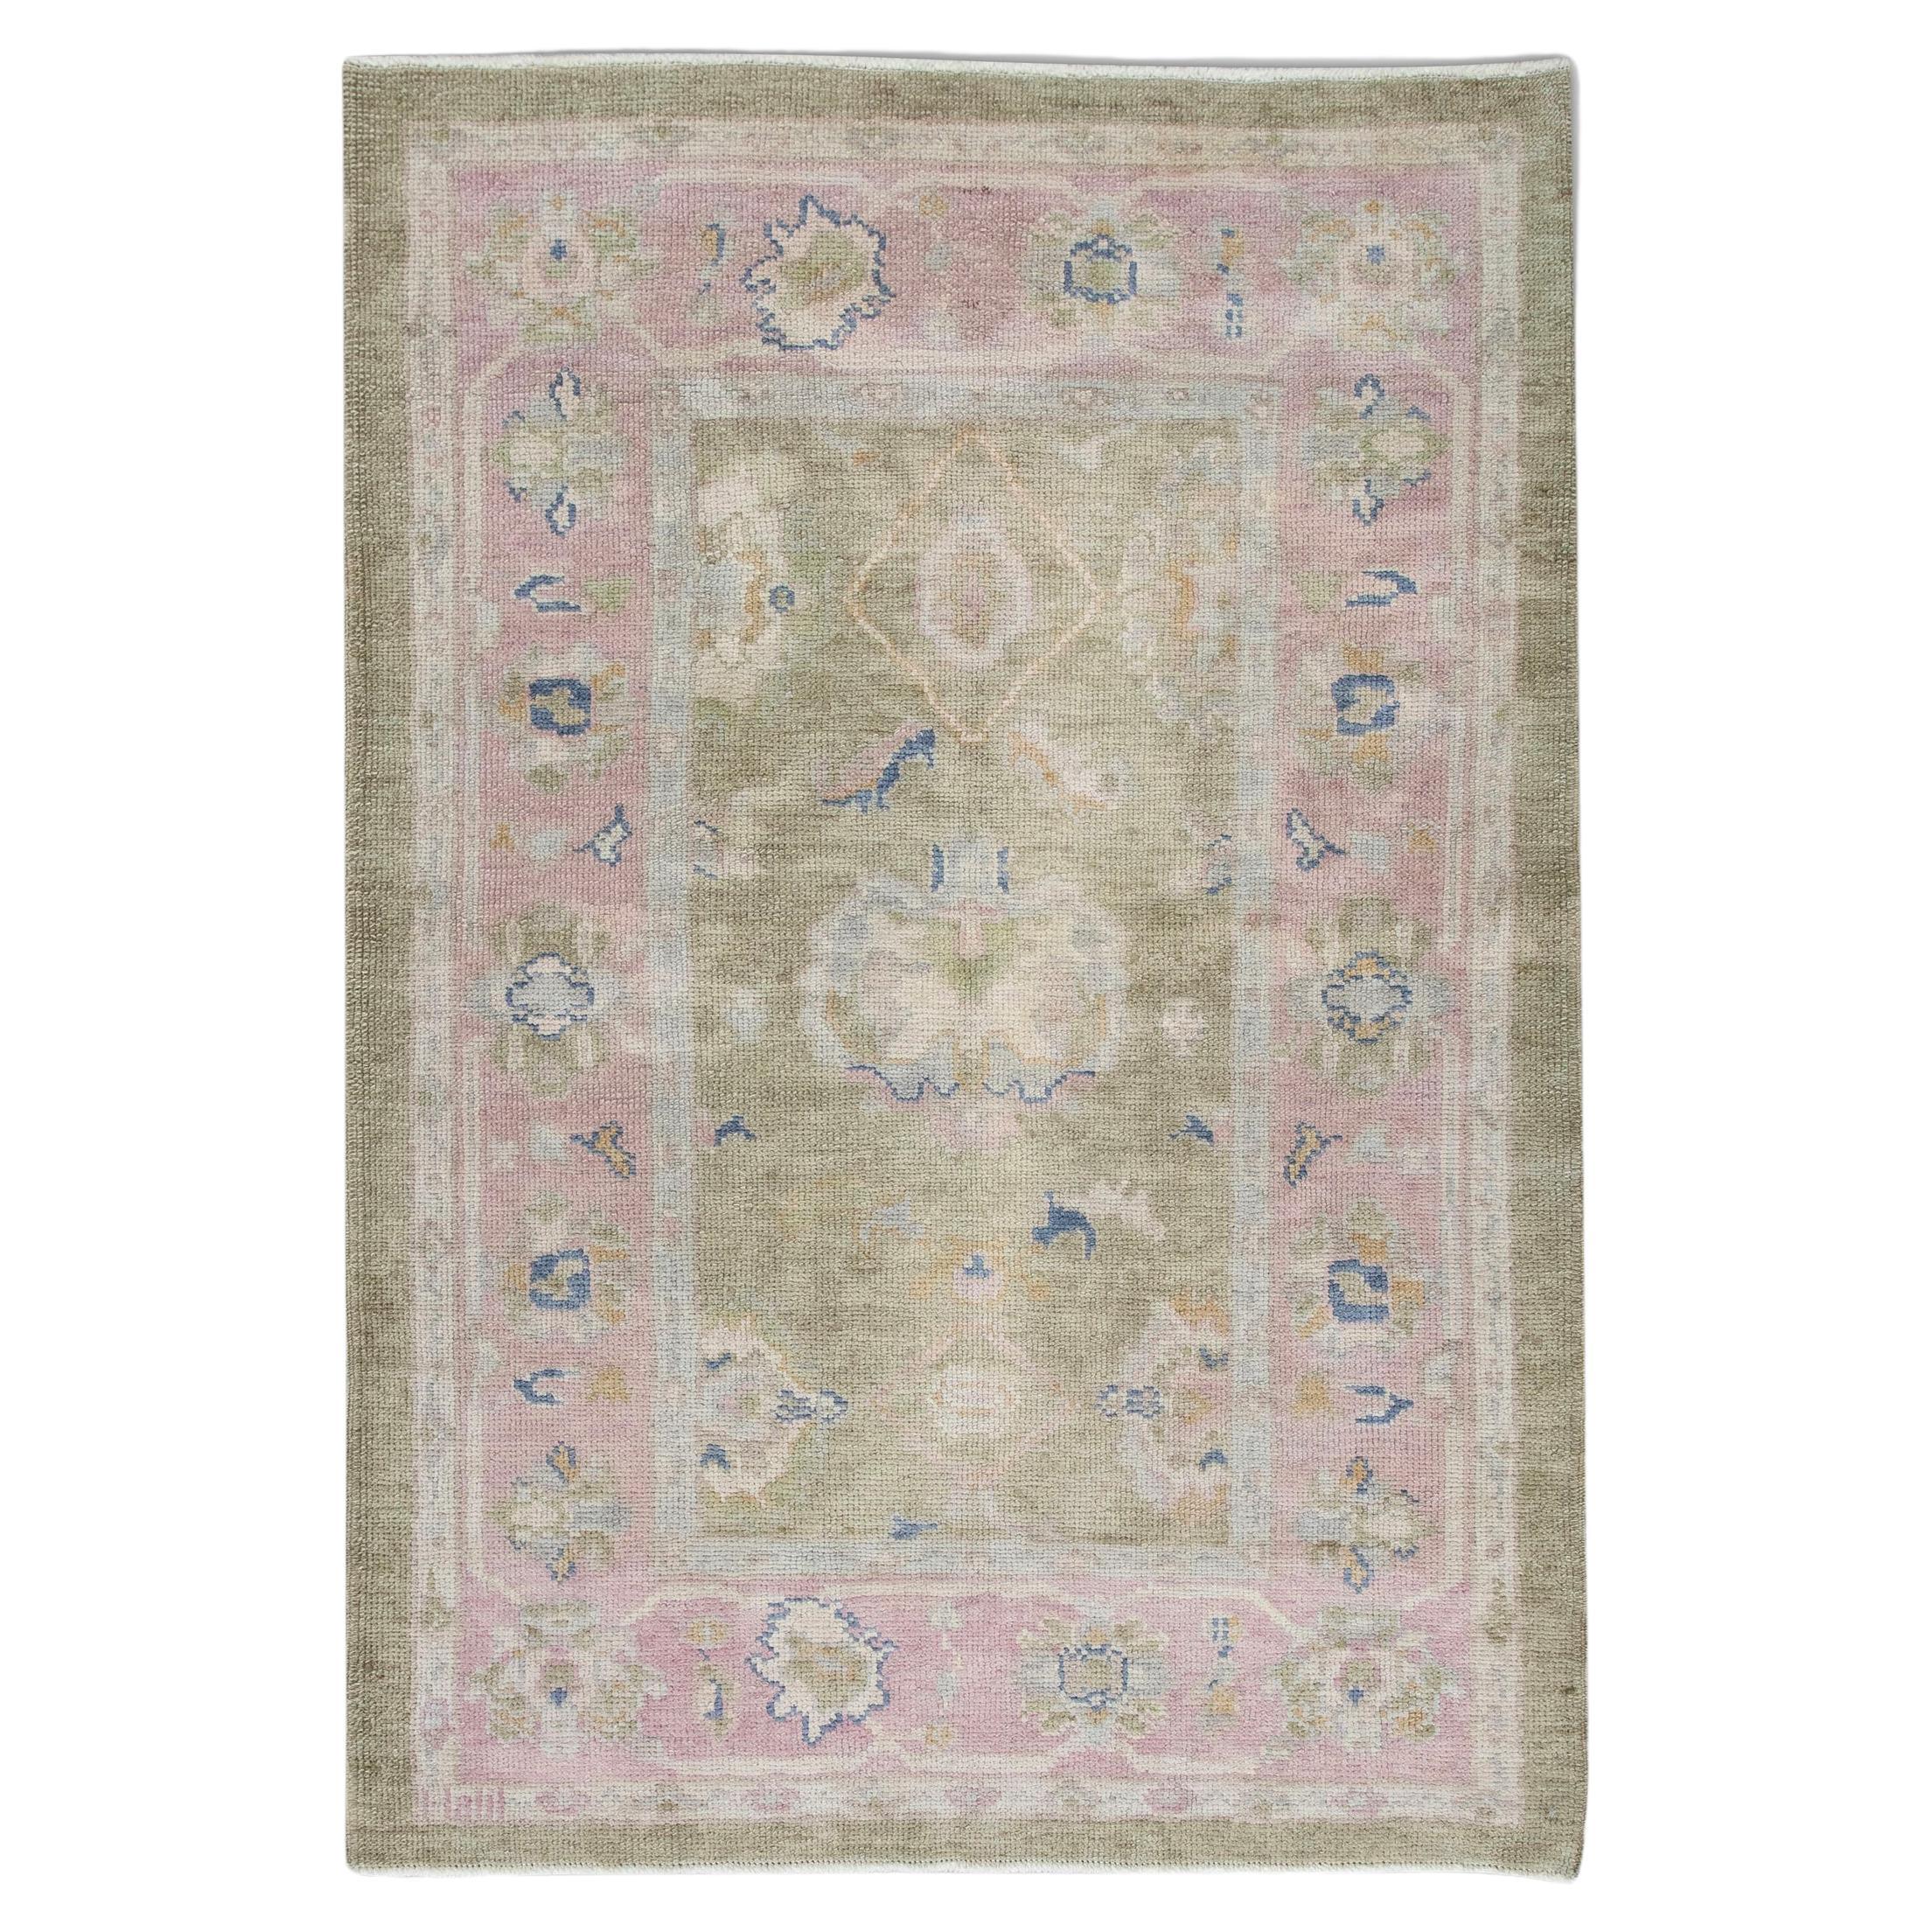 Olive Green and Pink Floral Design Handwoven Wool Turkish Oushak Rug 4'1" x 6' For Sale